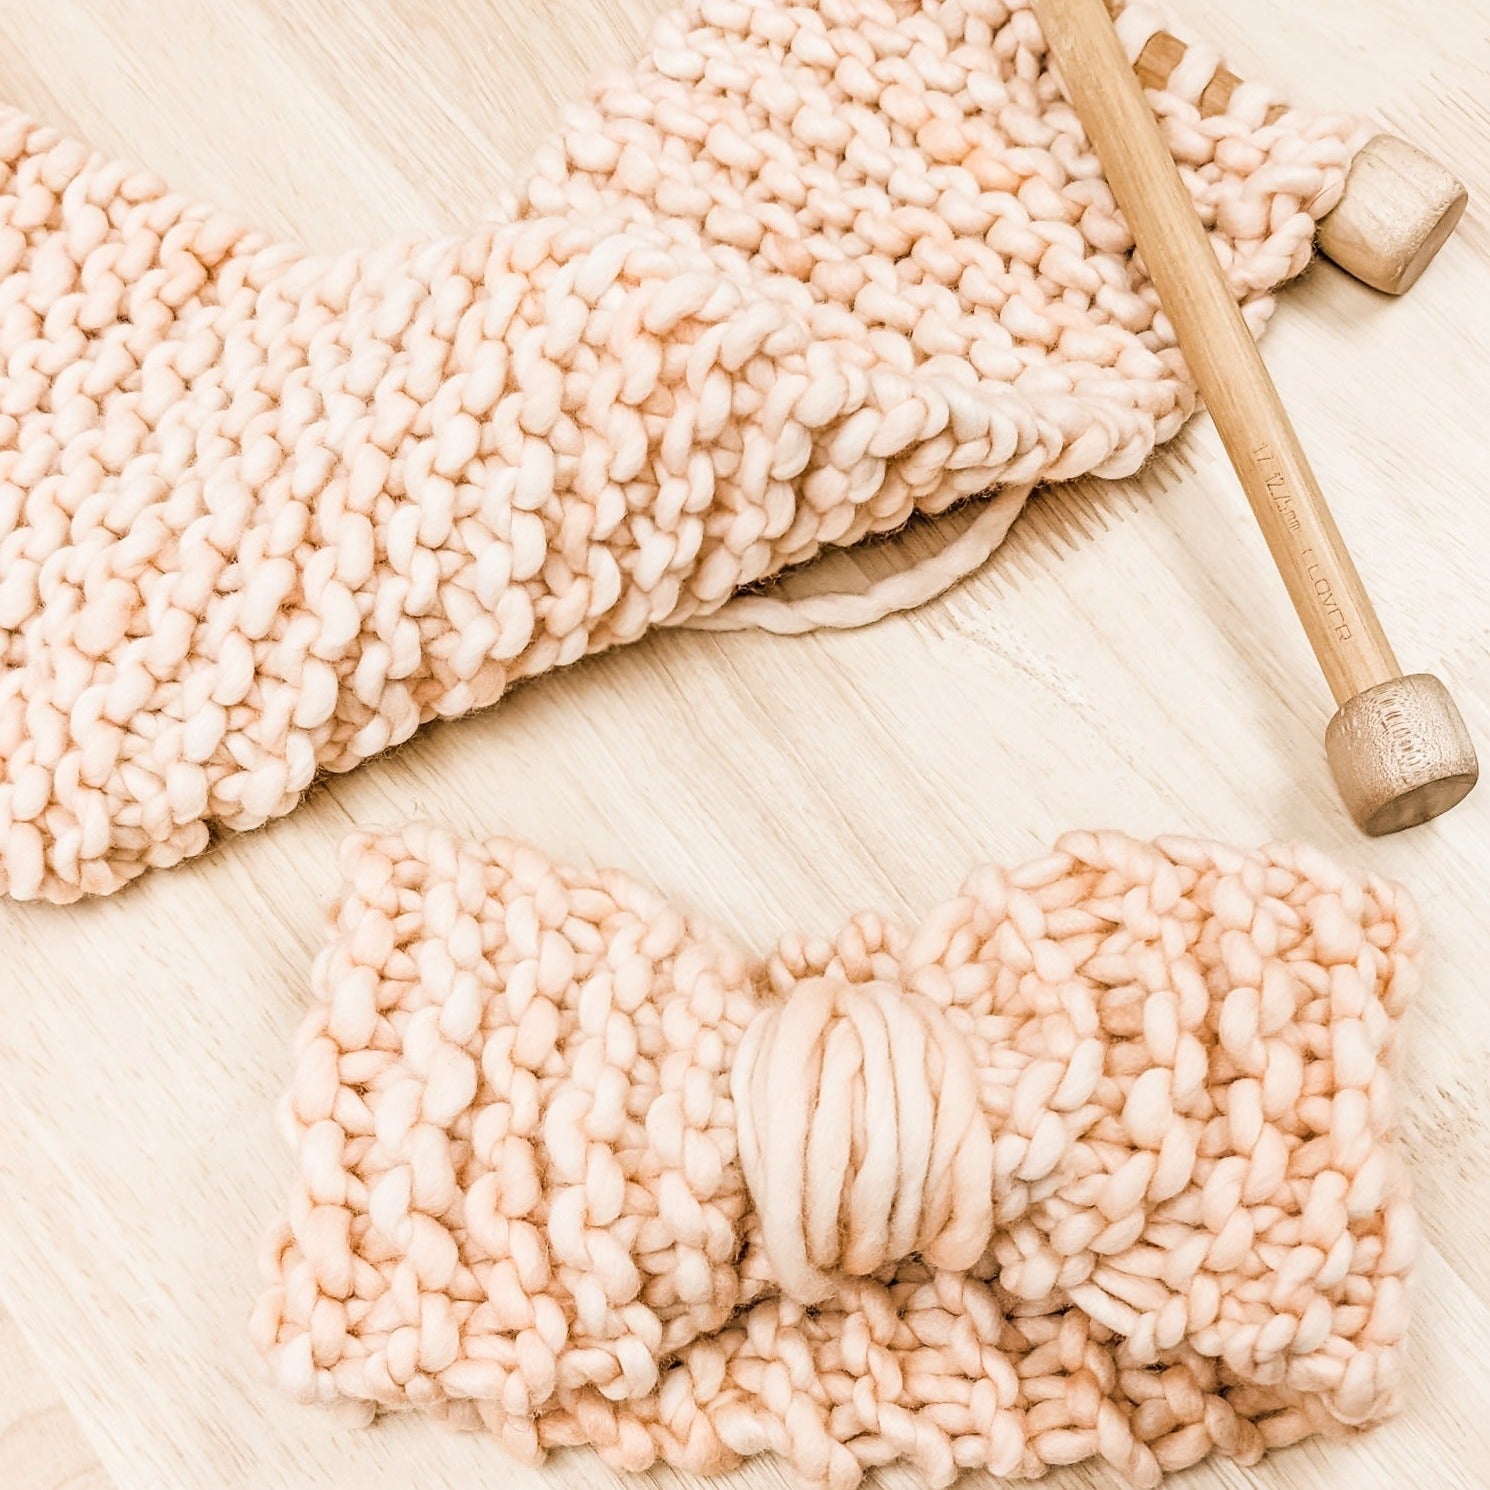 Beginner Knitting 101 Class - Materials Included - homesewn